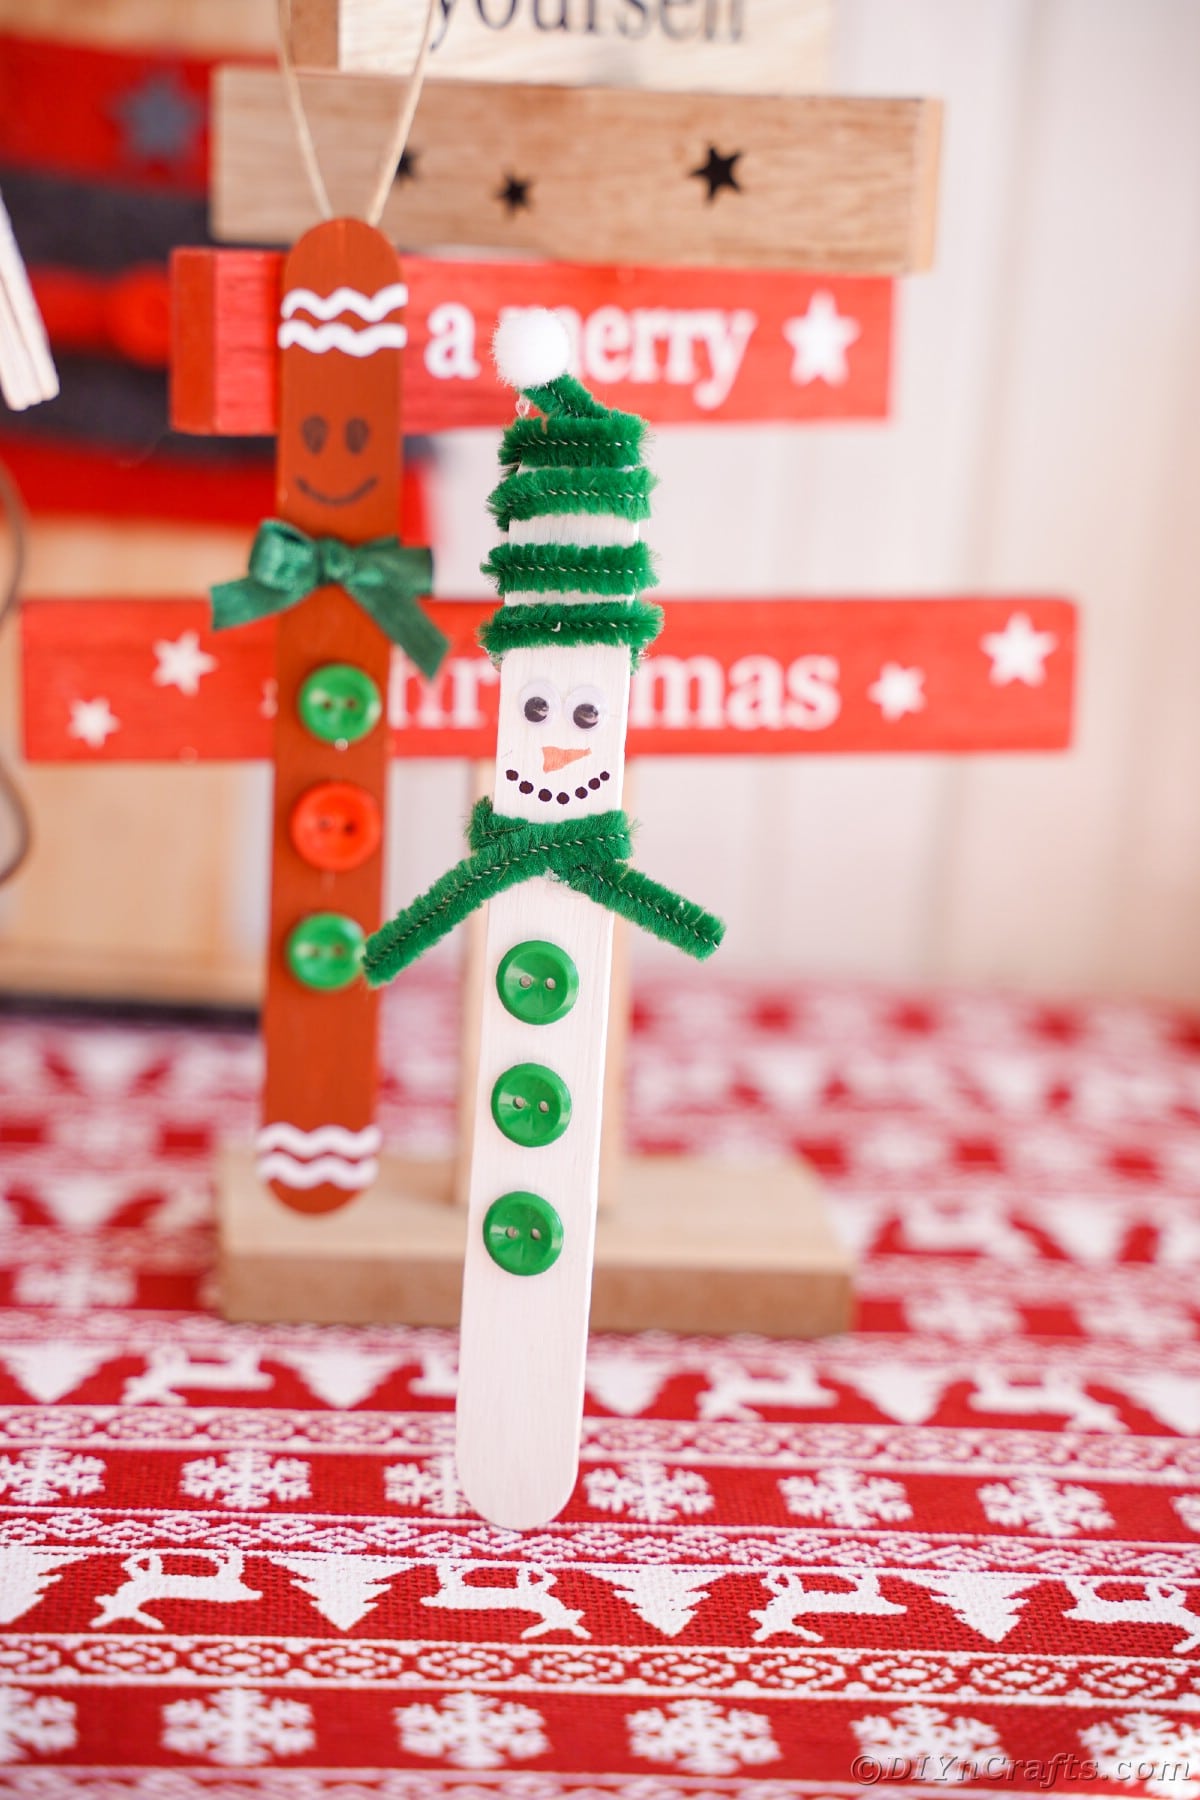 gingerbread and snowman craft stick ornaments in front of holiday decor